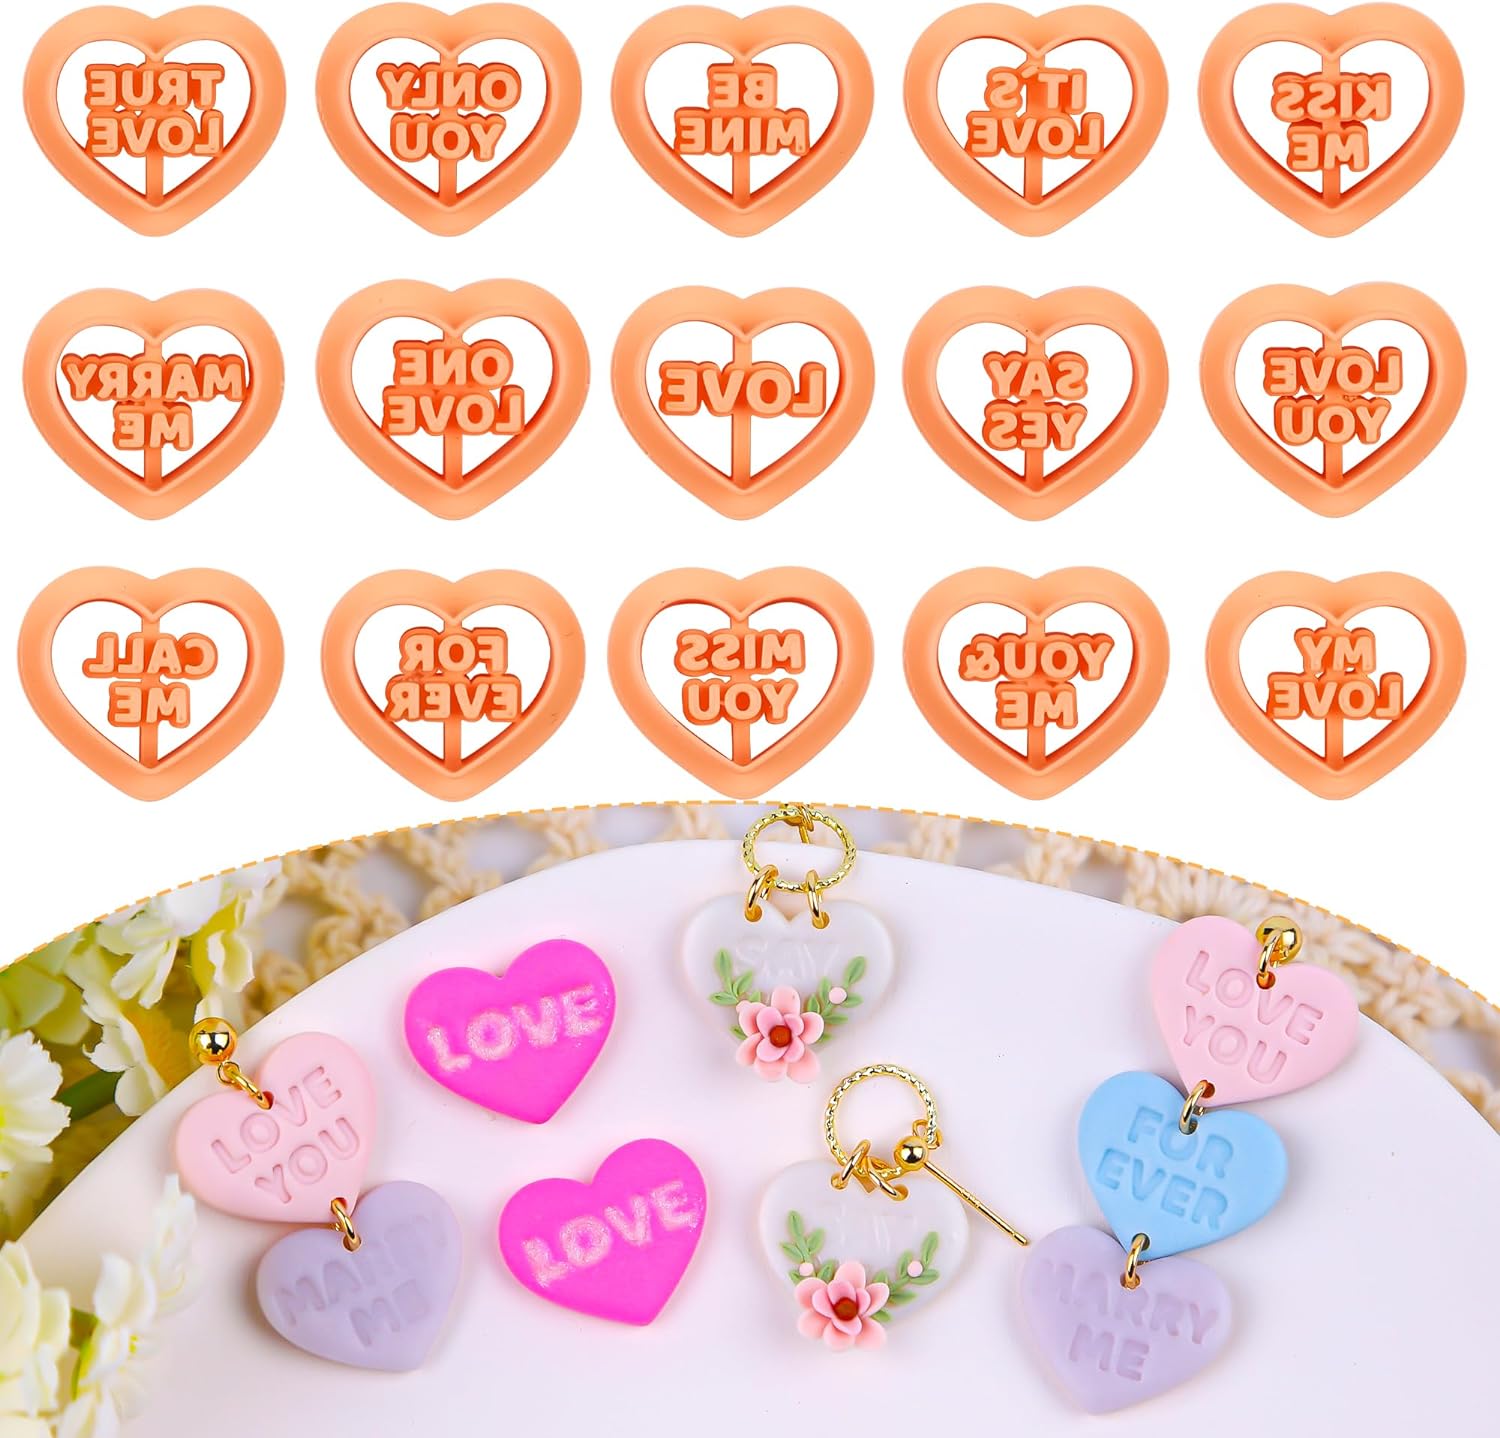 Puocaon Letters Valentines Clay Cutters 15 Pcs